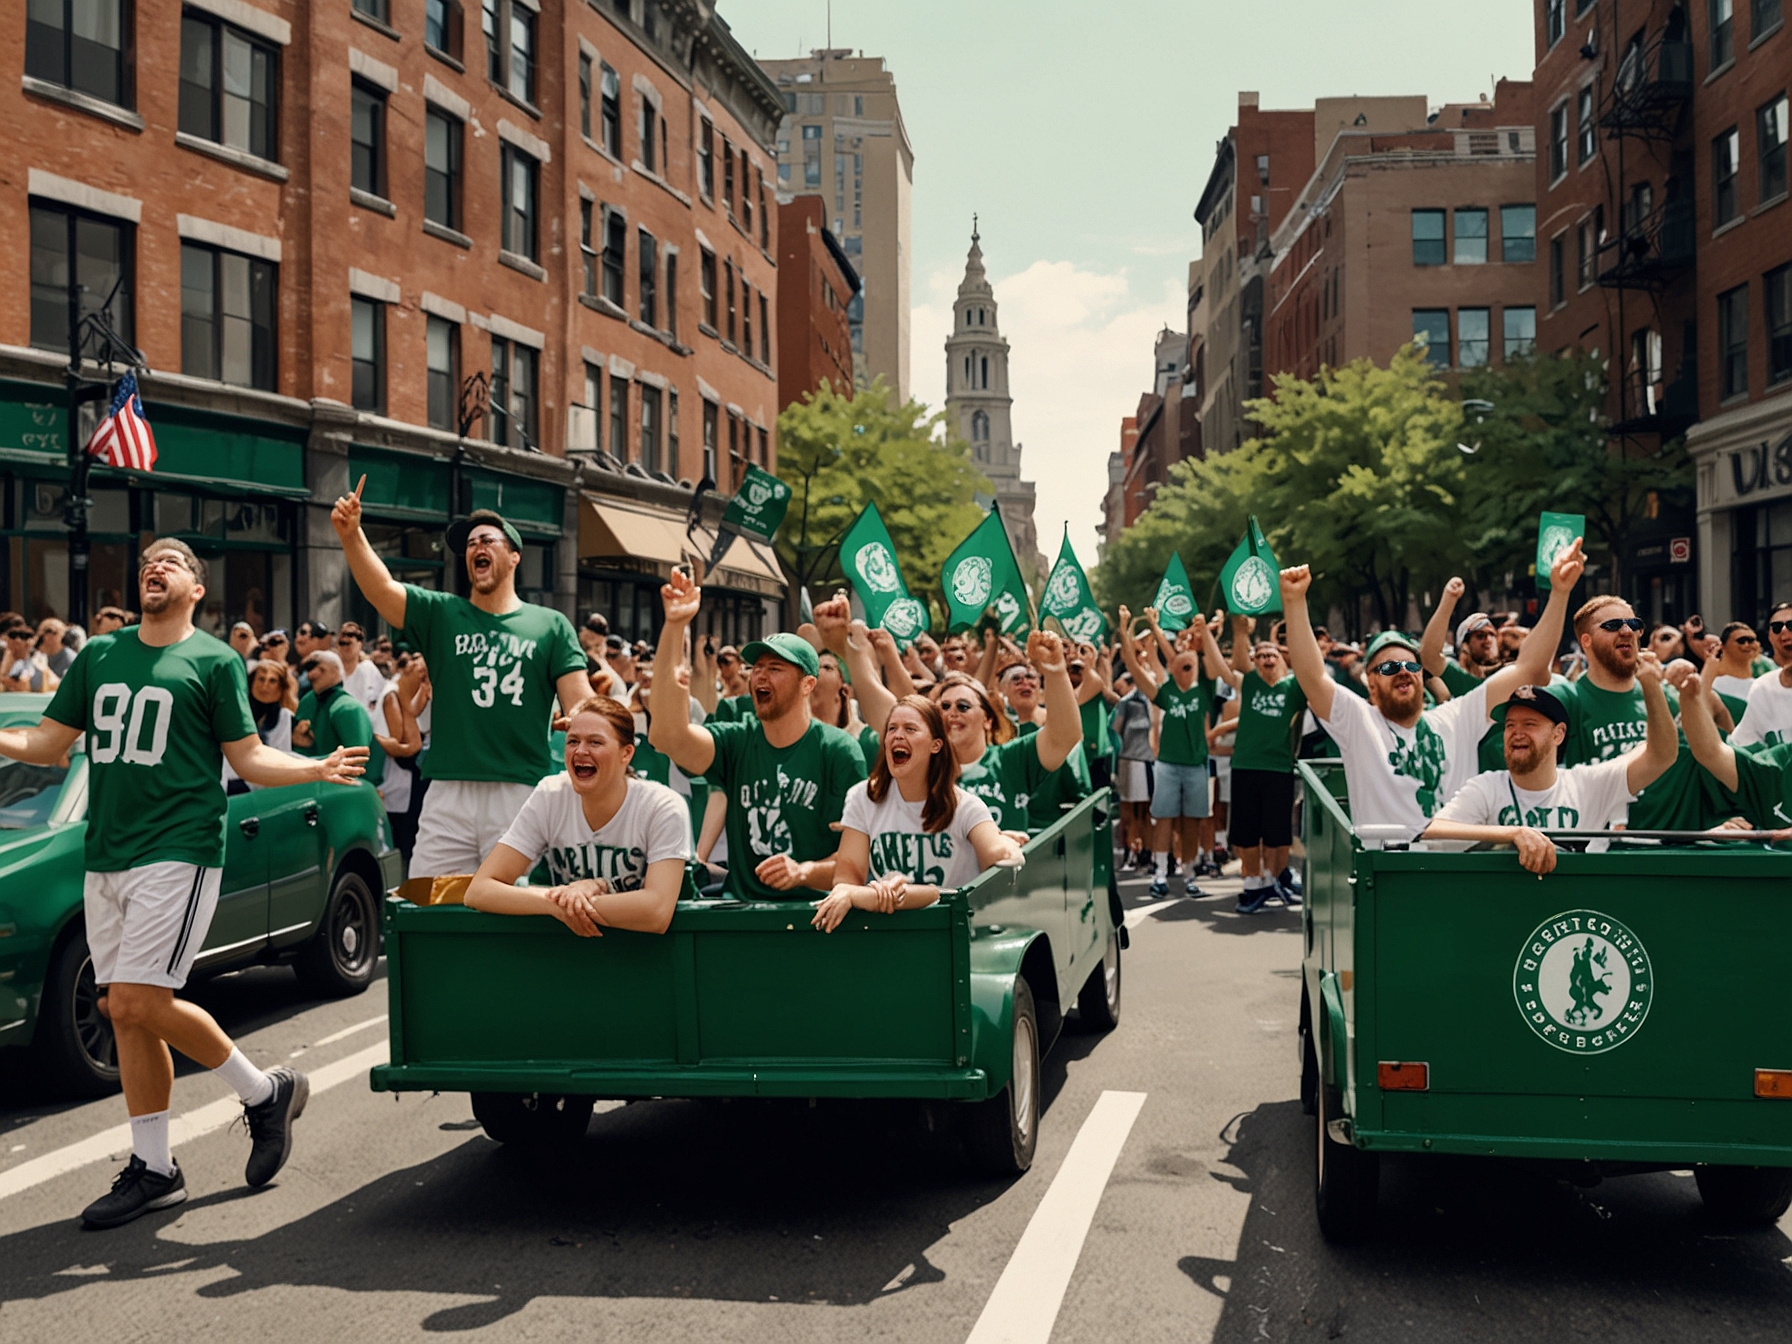 Excited Boston Celtics fans dressed in green and white line the parade route, waving banners and cheering as duck boats carrying the victorious team pass by iconic city landmarks.